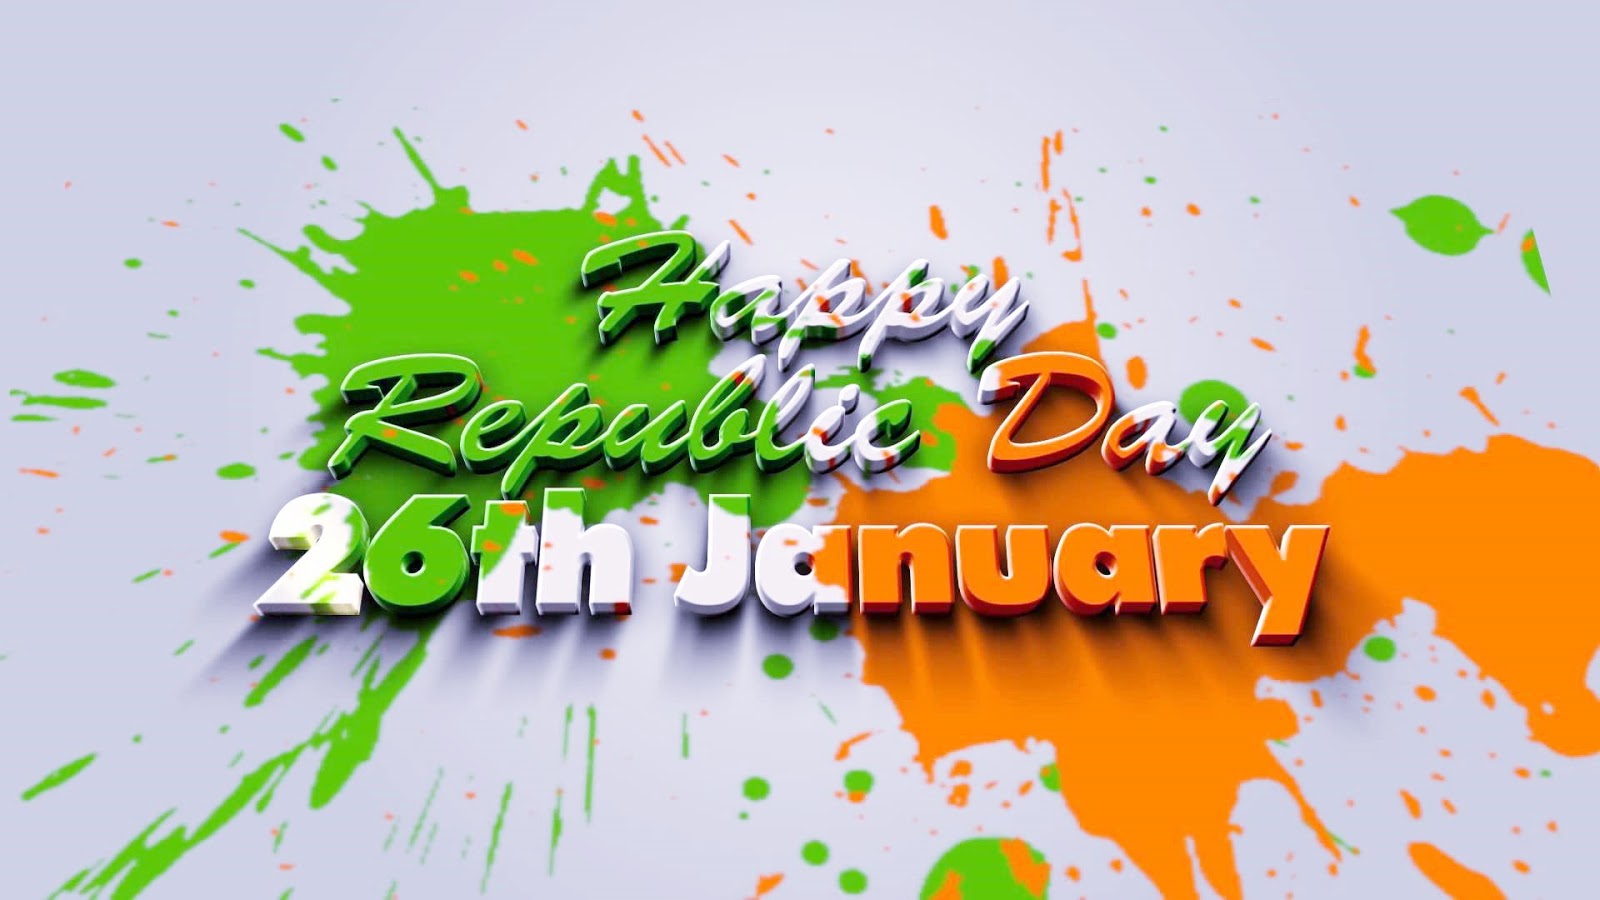 Happy Republic Day 2021 Images GIF Pictures HD Wallpapers